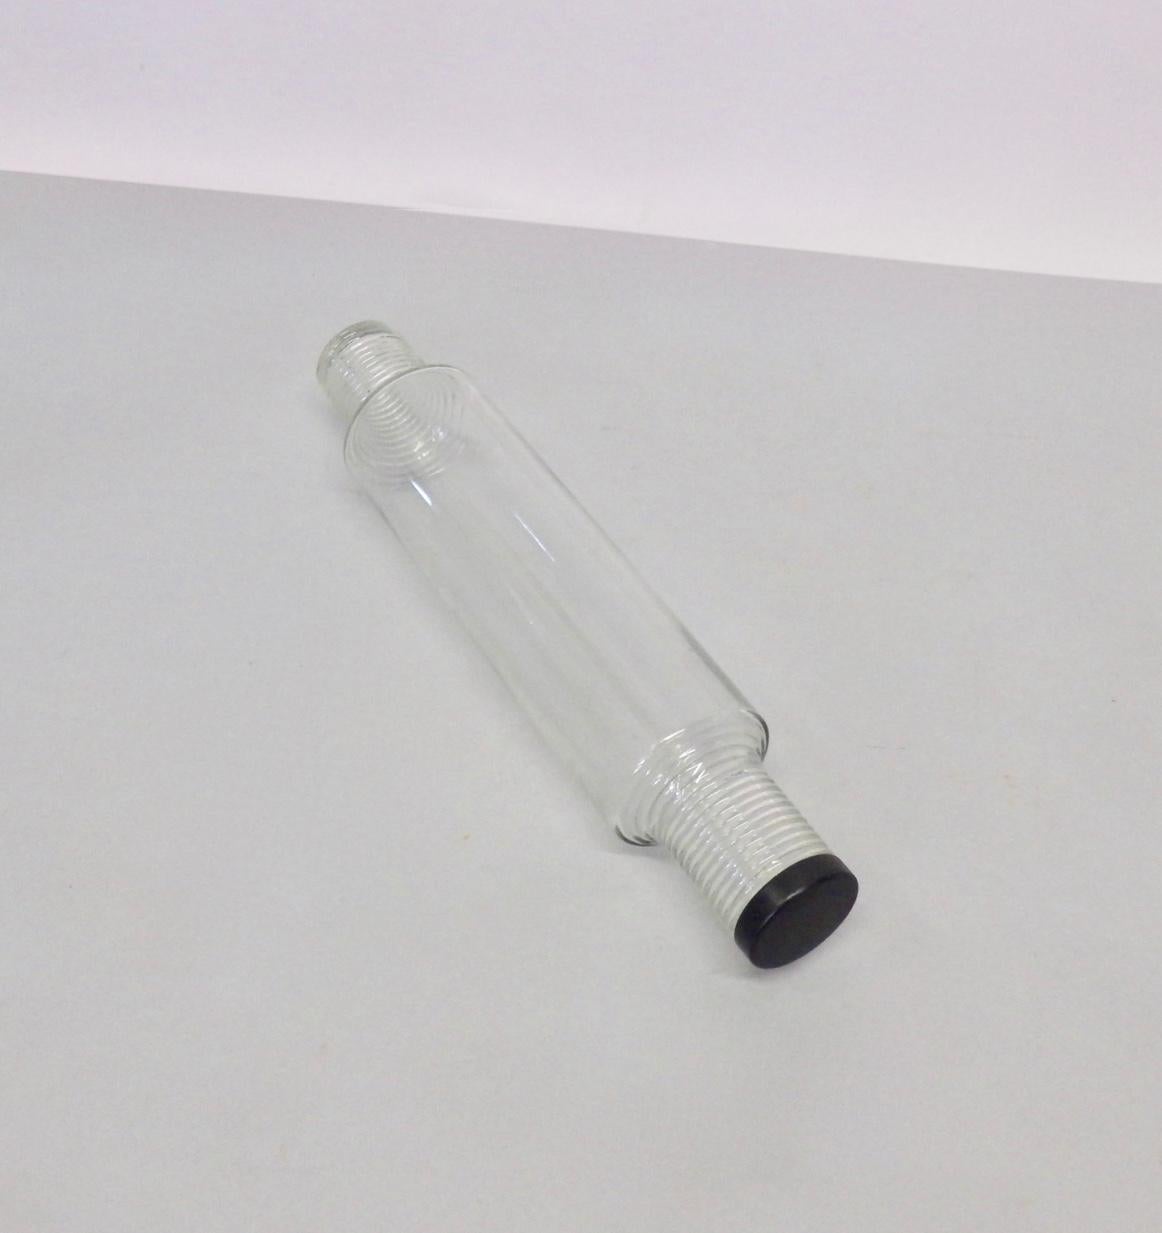 Machine age glass rolling pin with screw on metal end cap.